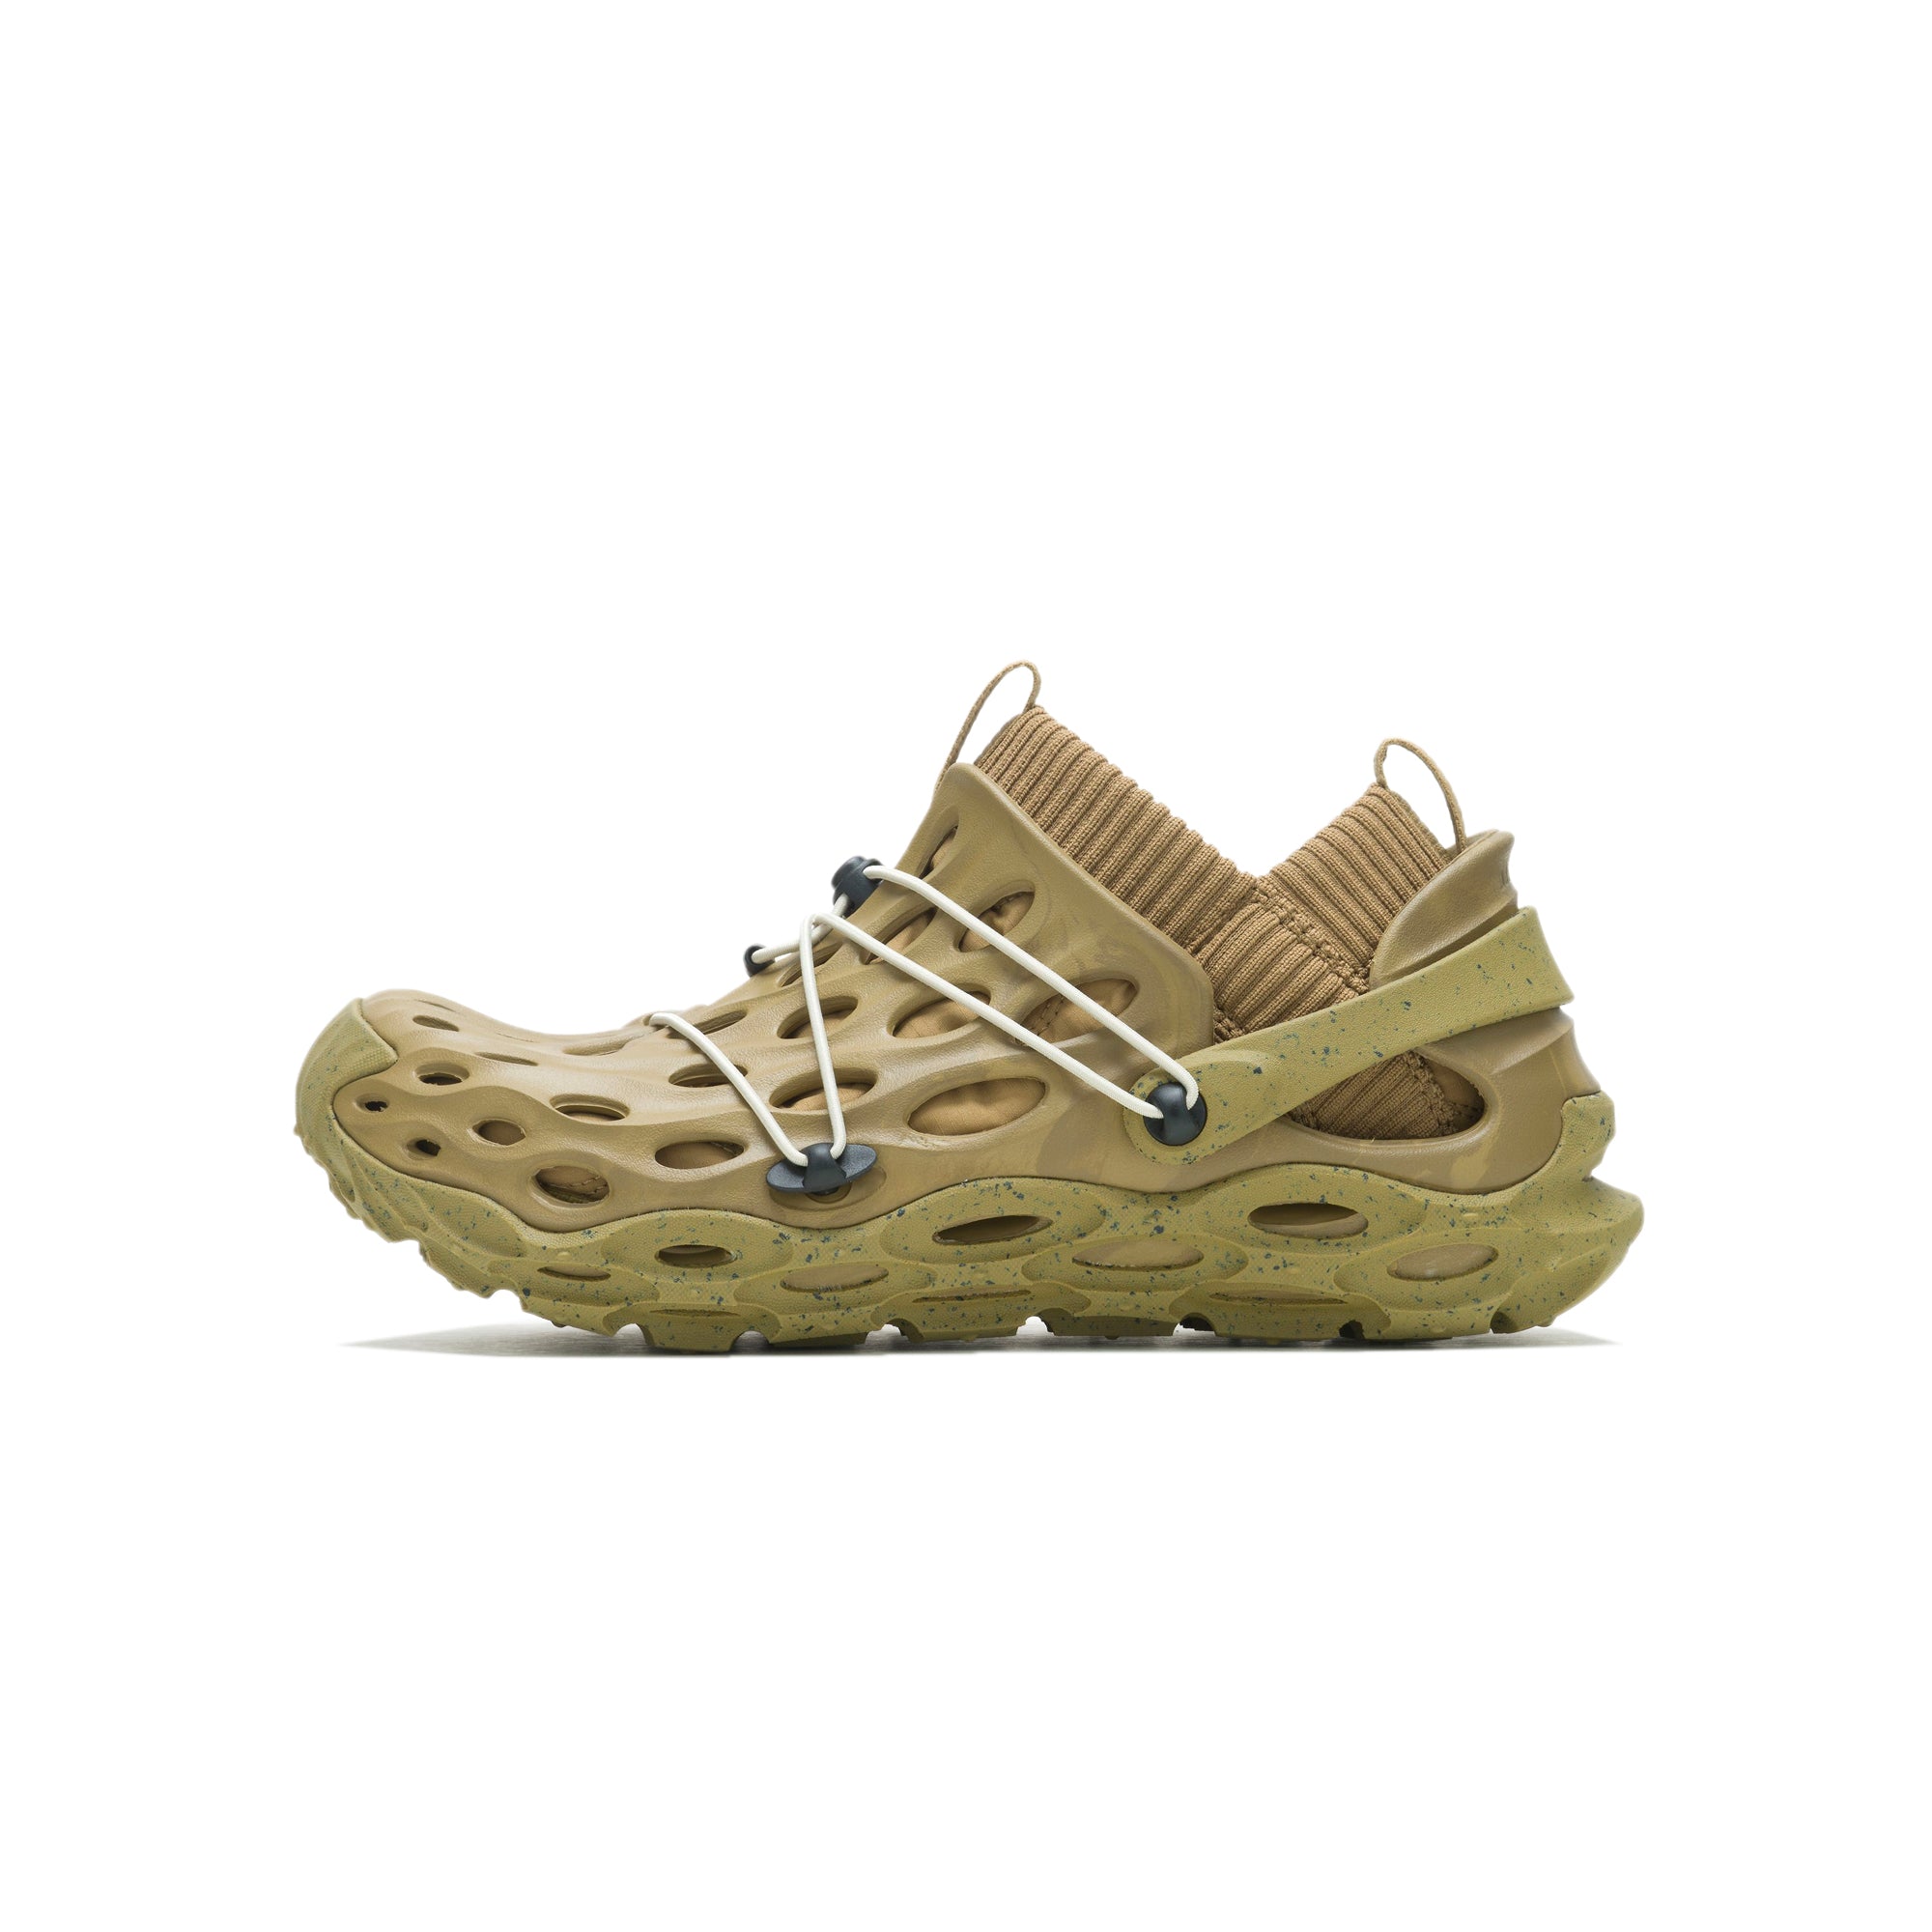 Merrell Womens Hydro Moc At Ripstop 1 TRL Shoes